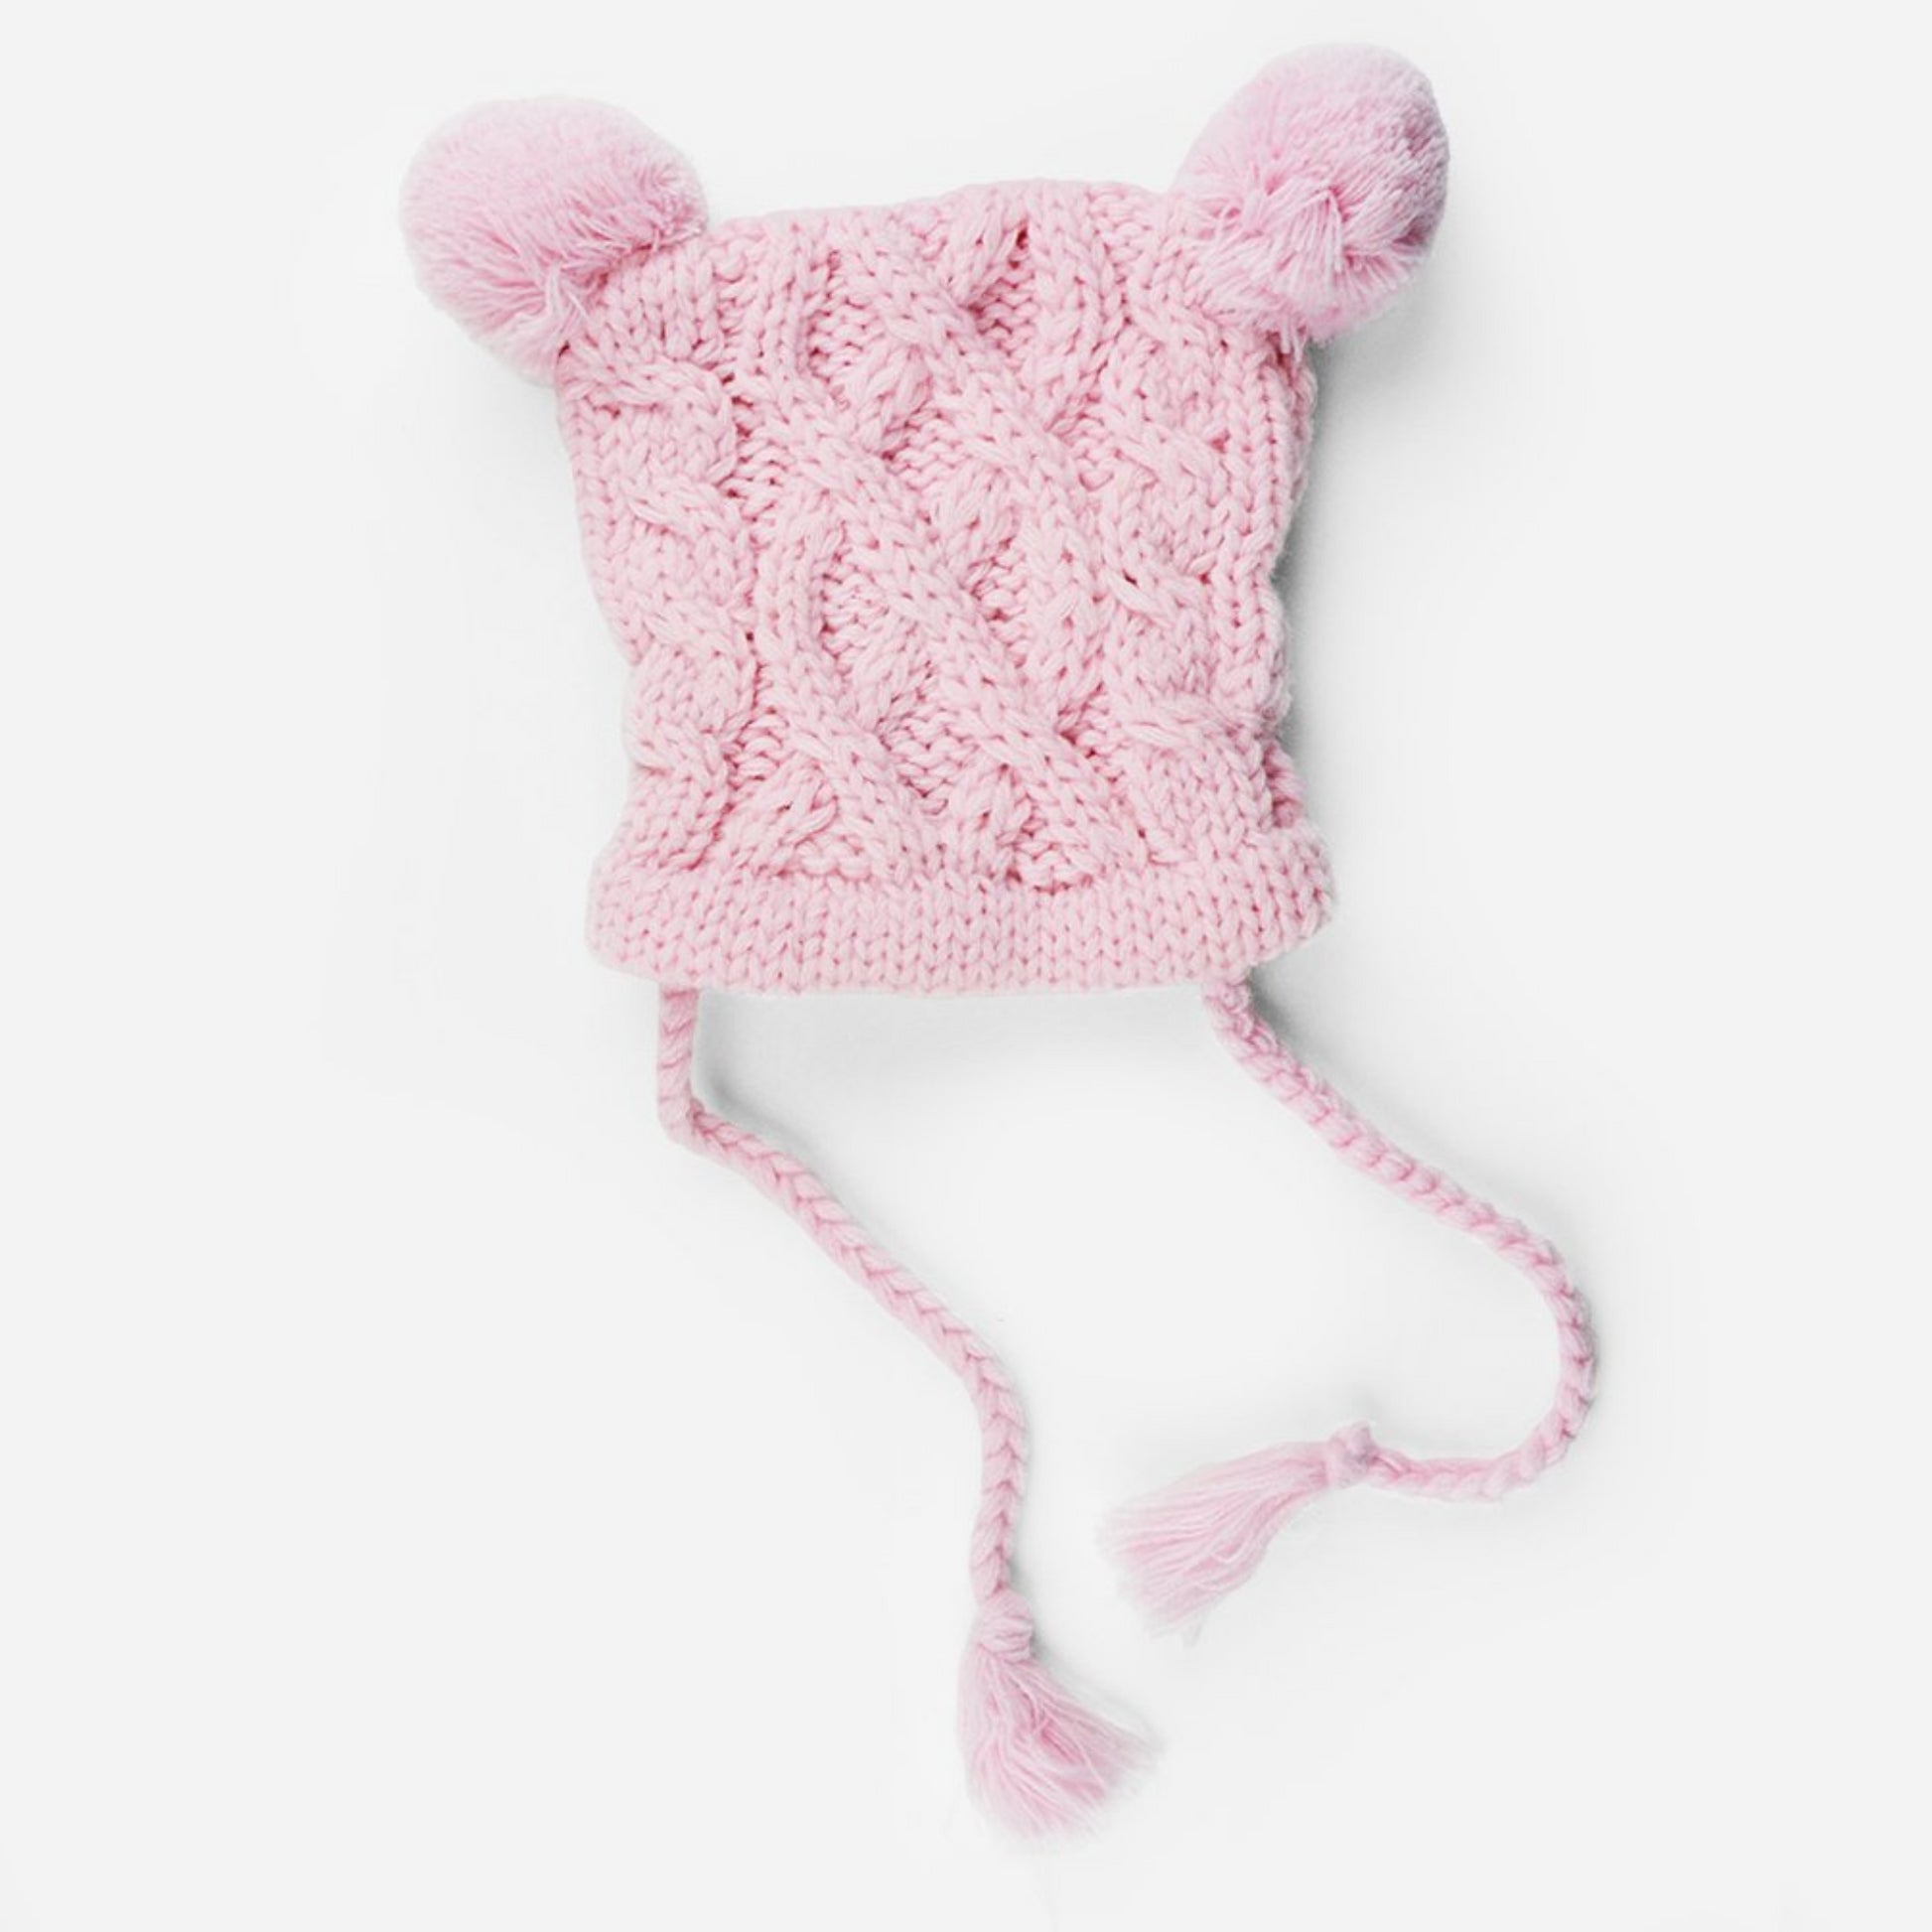 cable knit hat for baby with poms and tassels pink